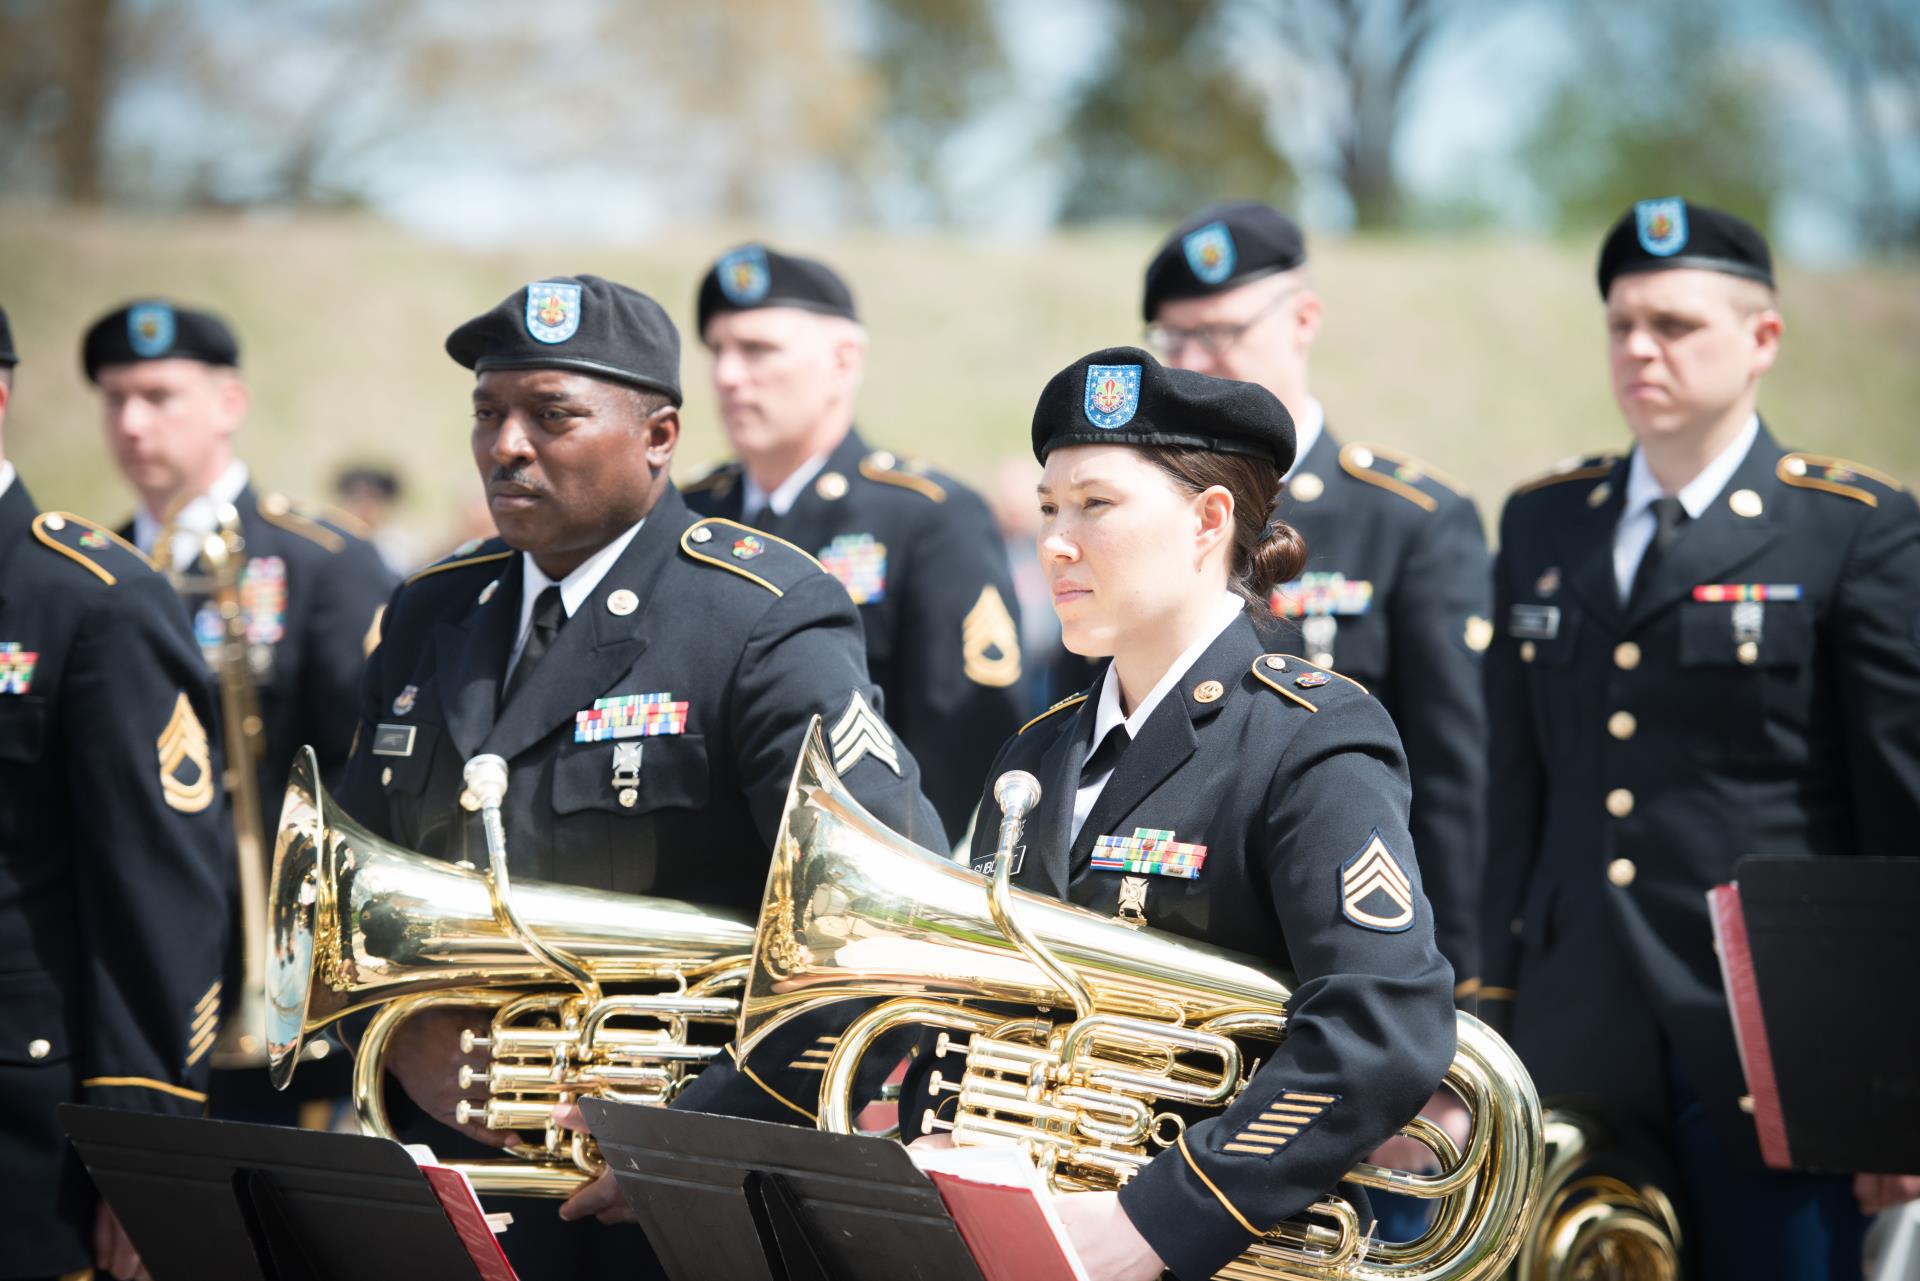 Band members of the 29th Infantry Division of the Virginia Army National Guard